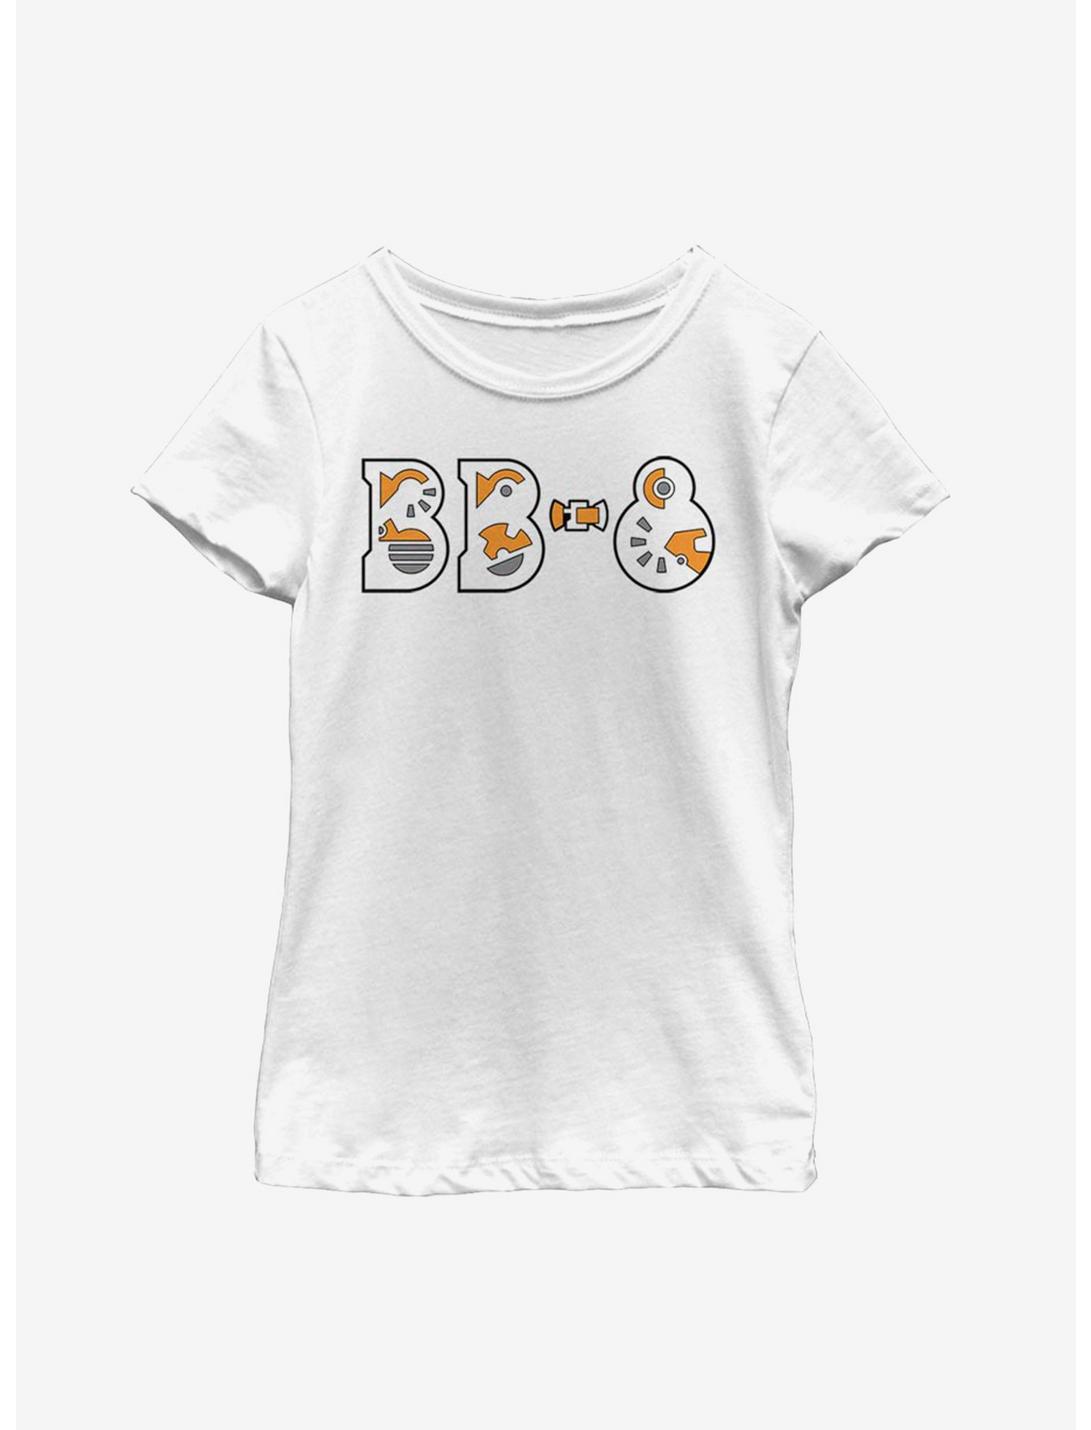 Star Wars Episode IX The Rise Of Skywalker BB-8 Droid Parts Youth Girls T-Shirt, WHITE, hi-res